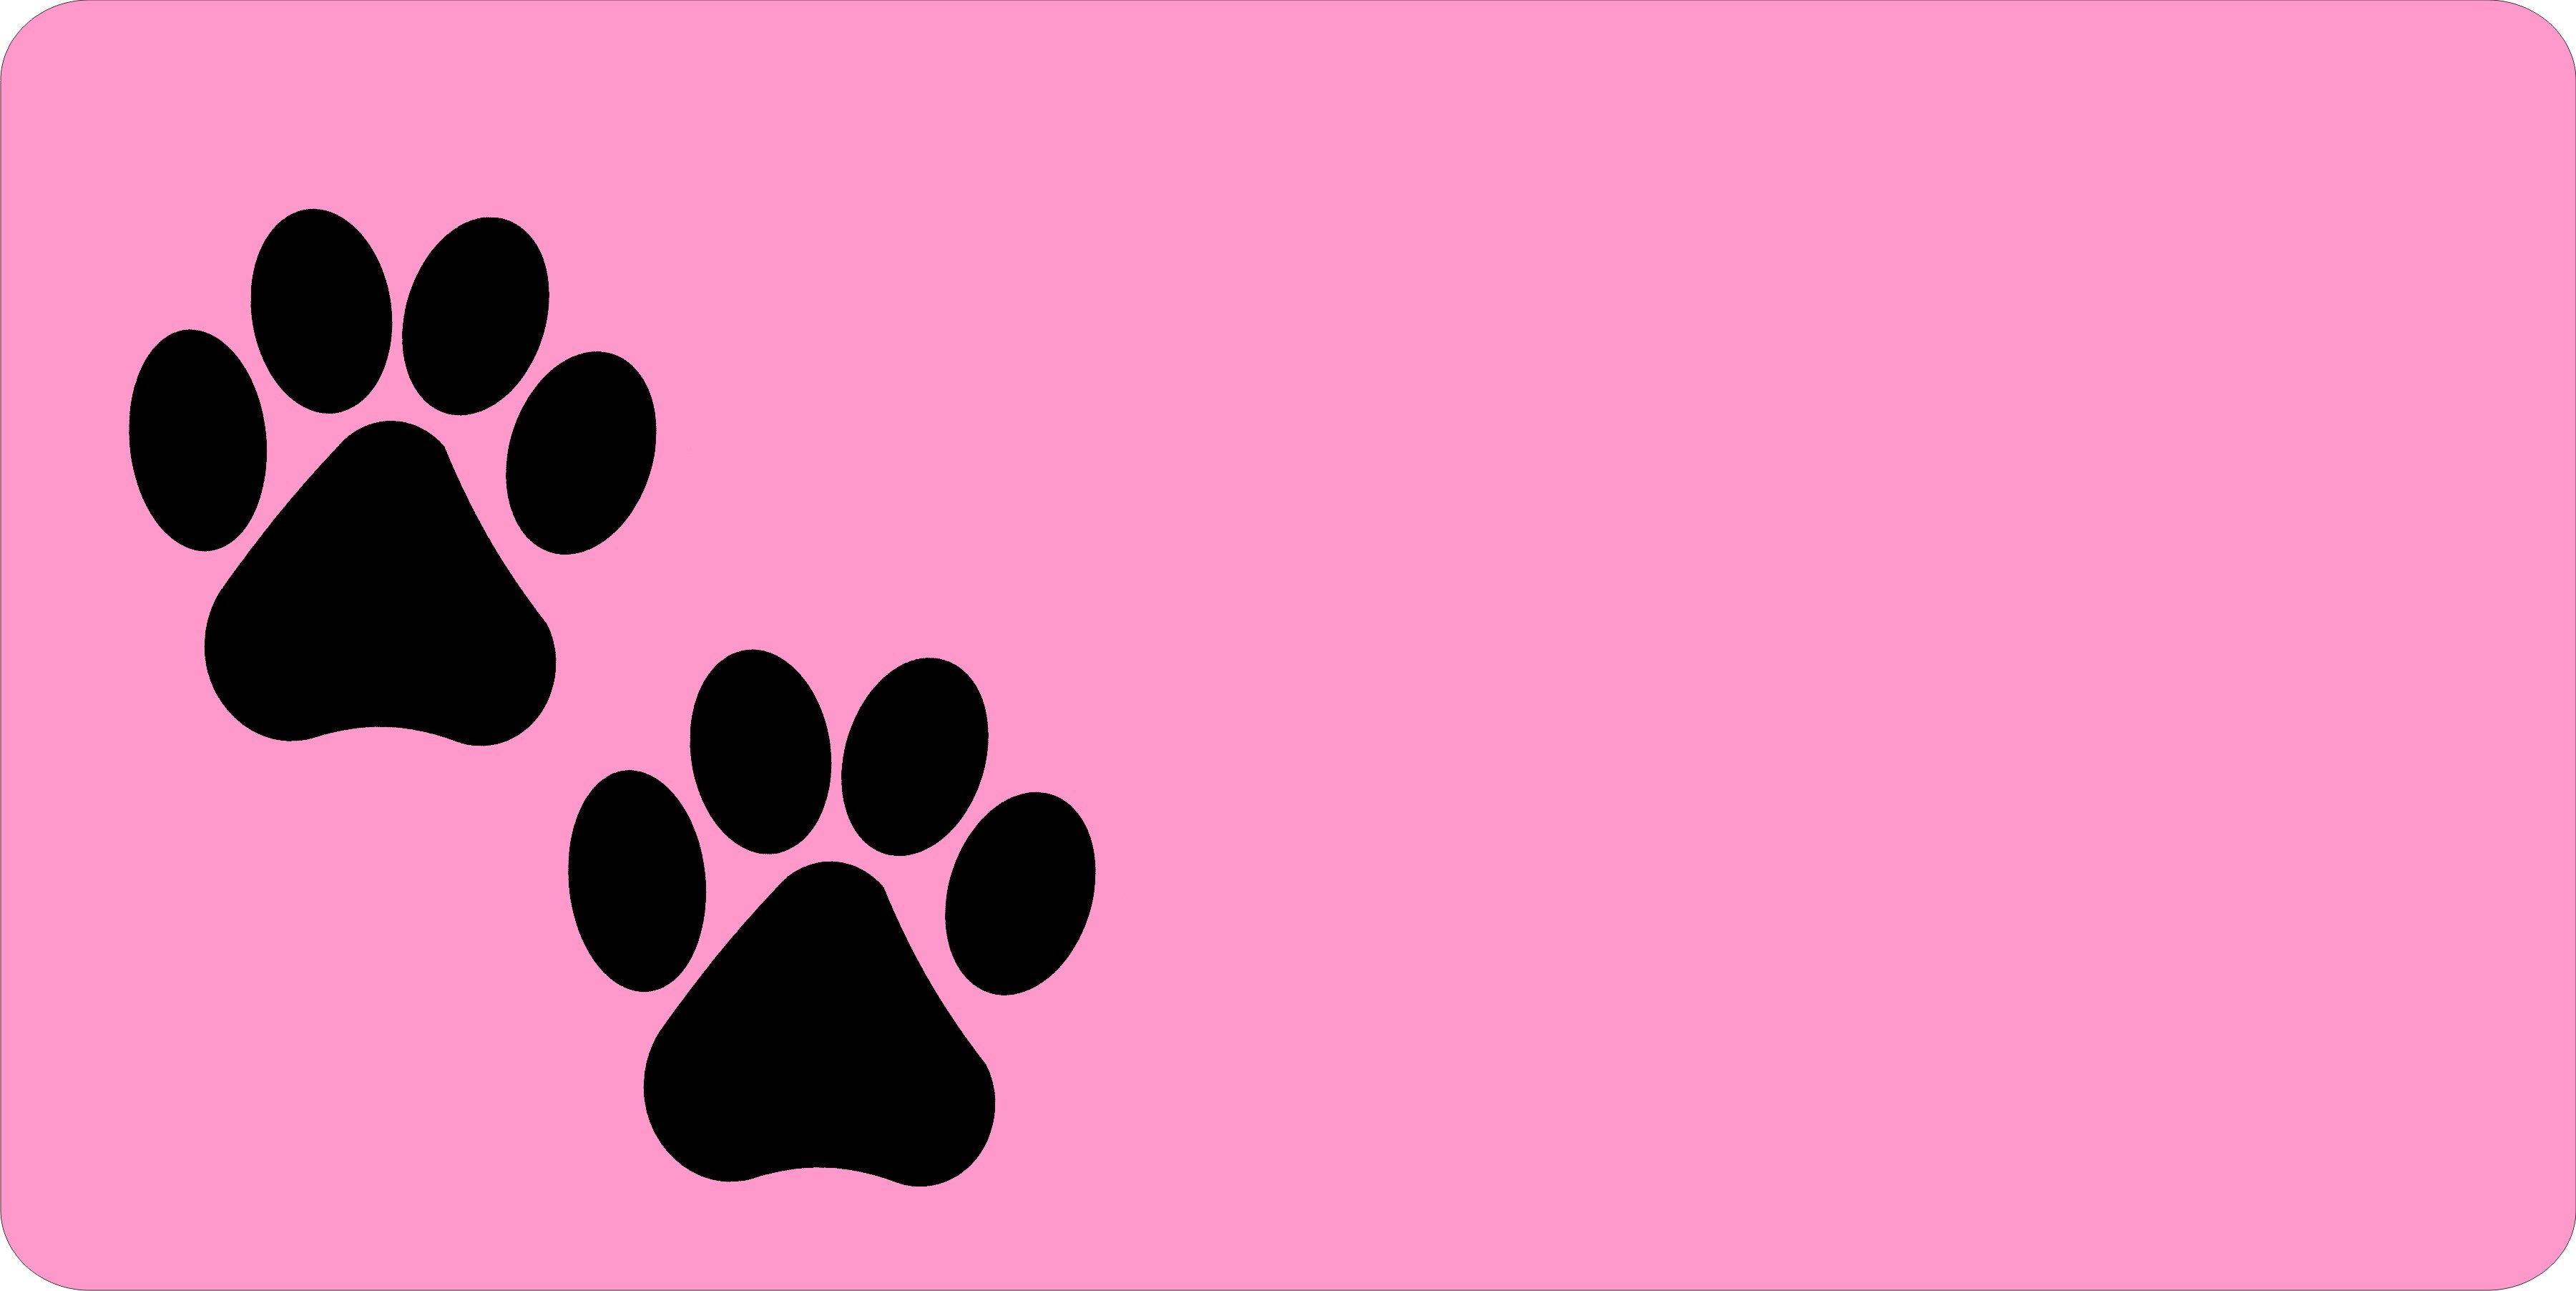 Black Paw Prints Offset On Pink LICENSE PLATE Free Personalization on this PLATE